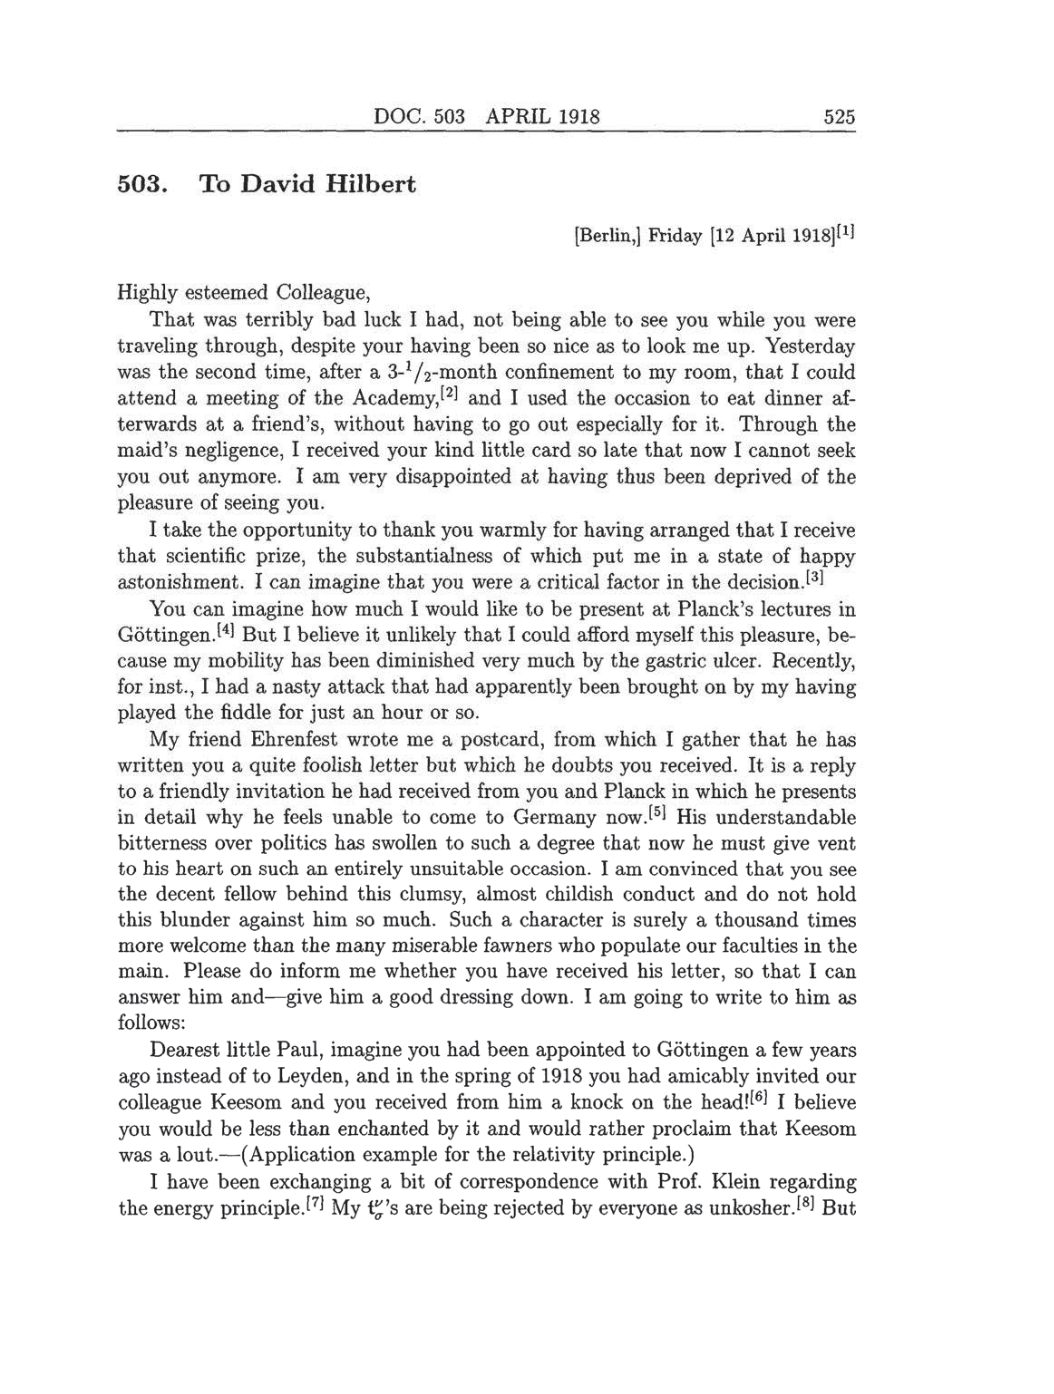 Volume 8: The Berlin Years: Correspondence, 1914-1918 (English translation supplement) page 525